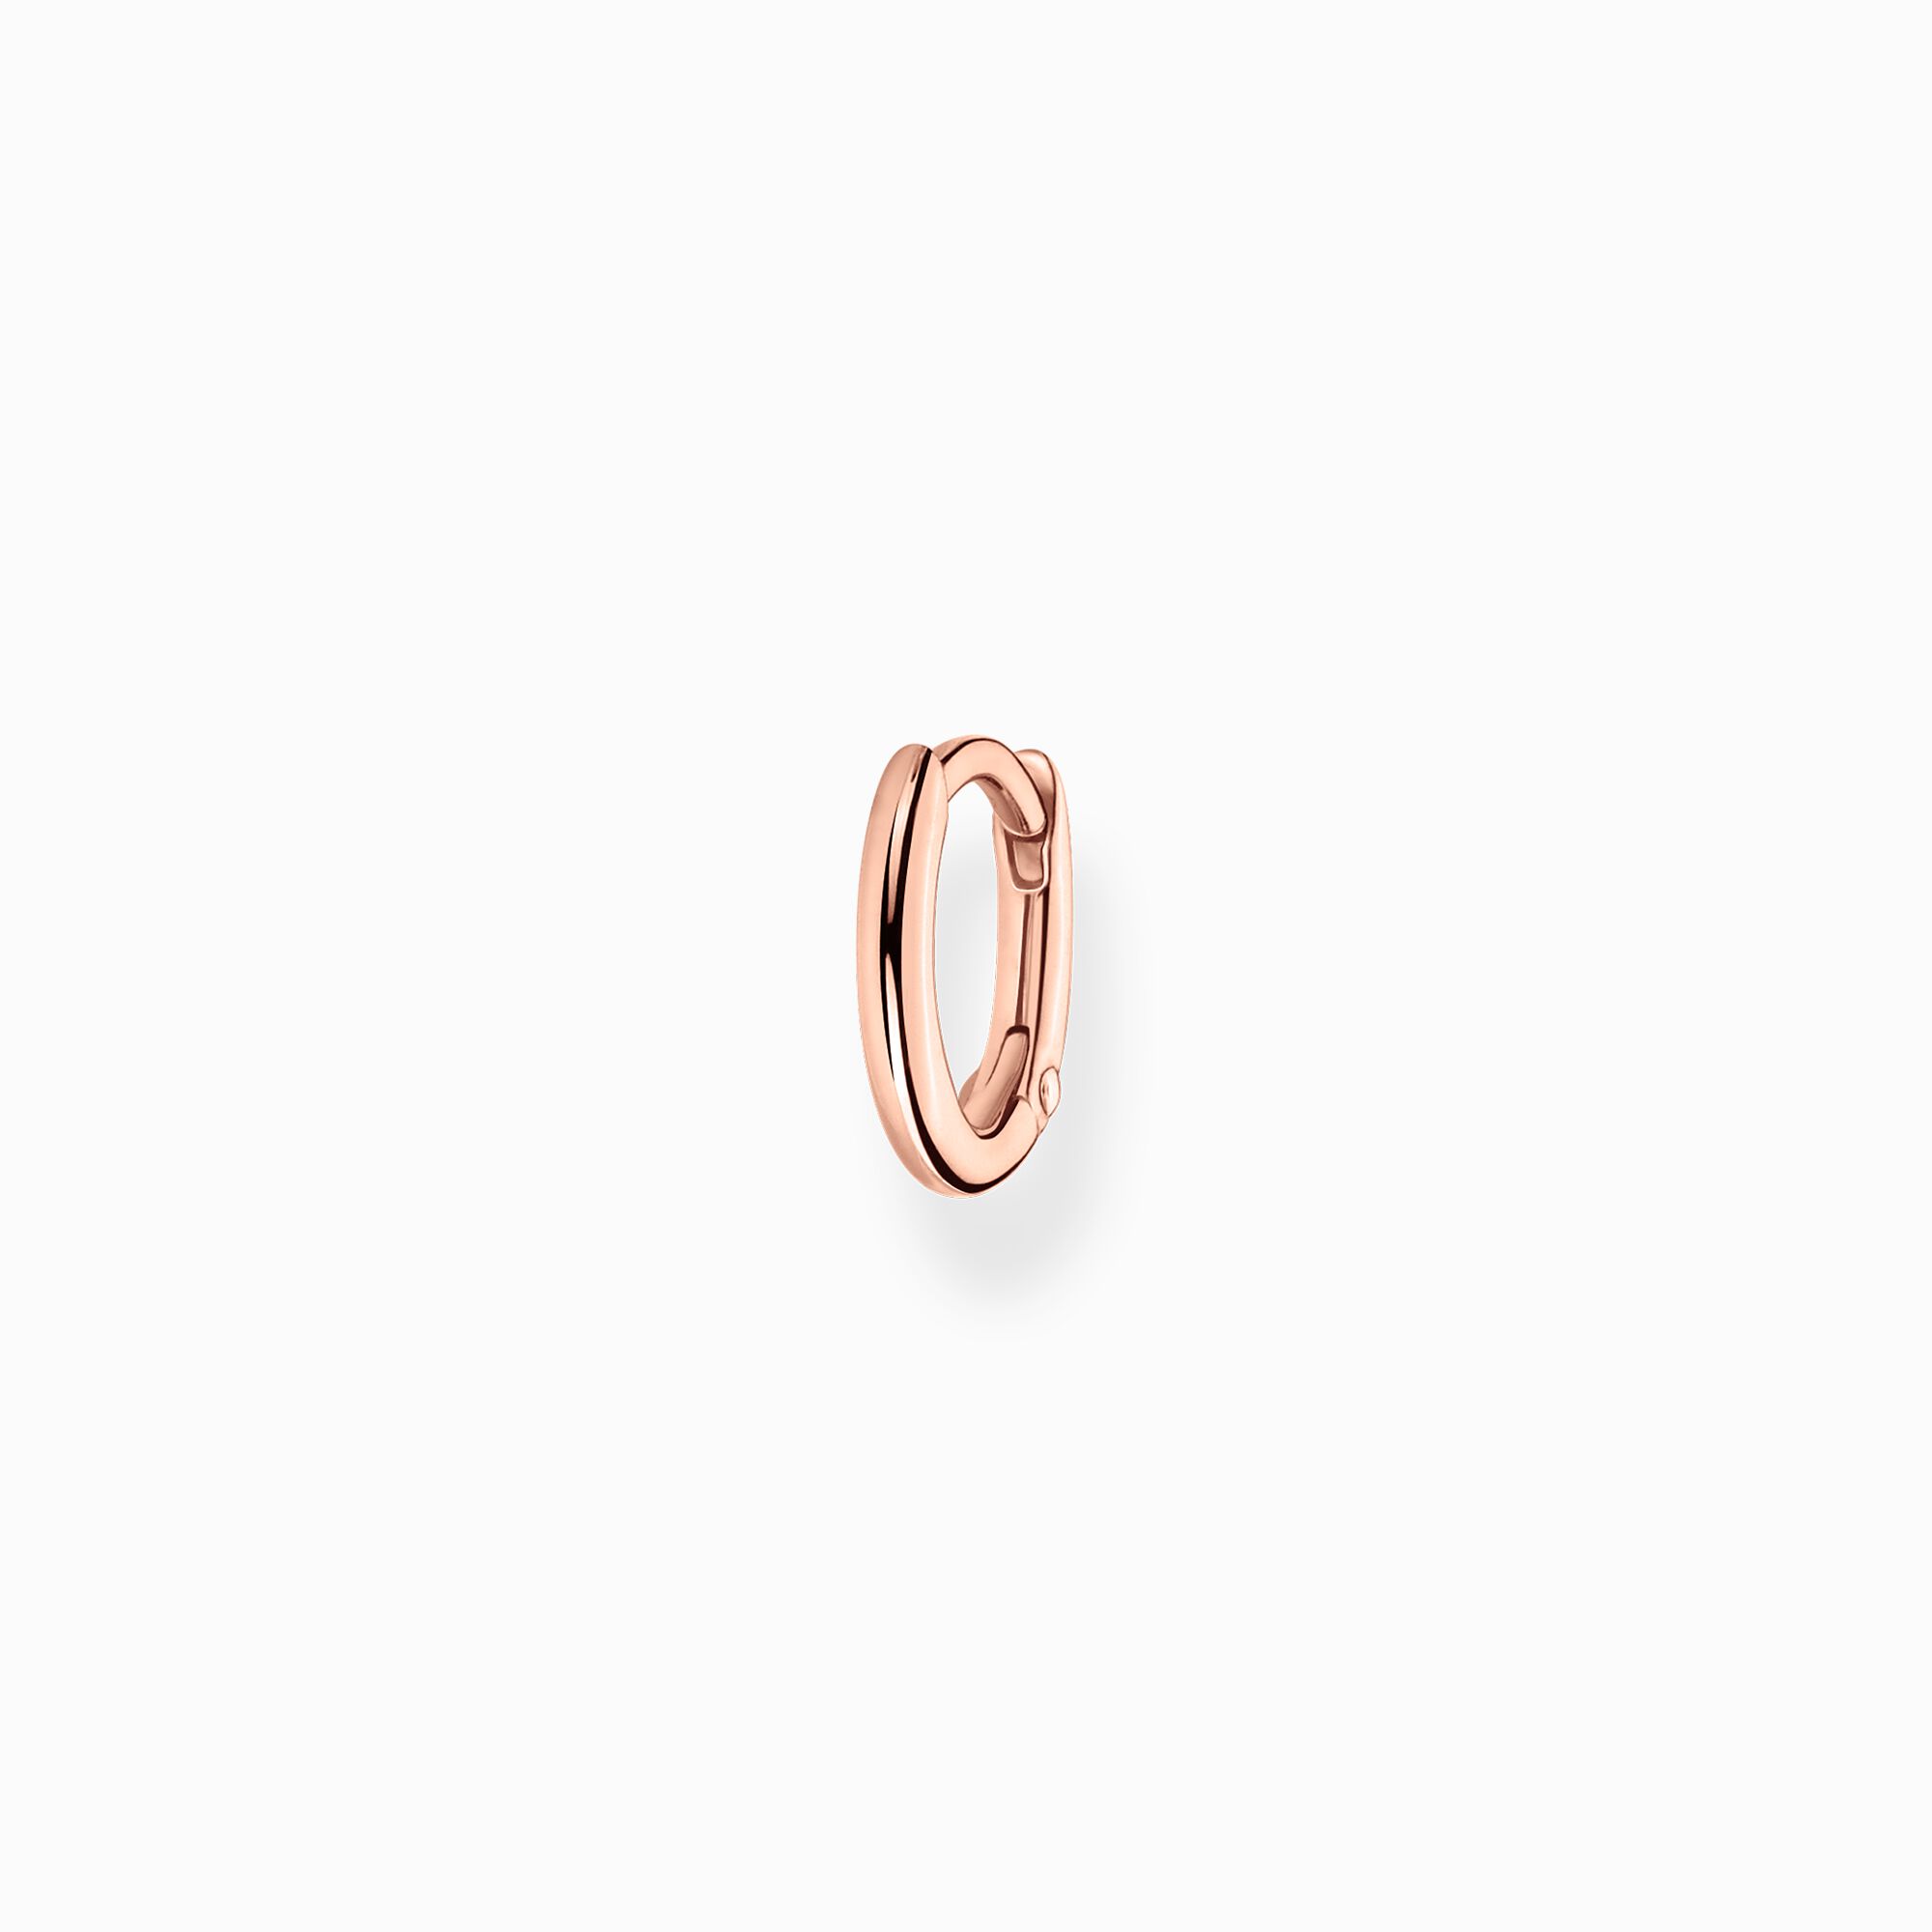 Single hoop earring classic rose gold from the Charming Collection collection in the THOMAS SABO online store